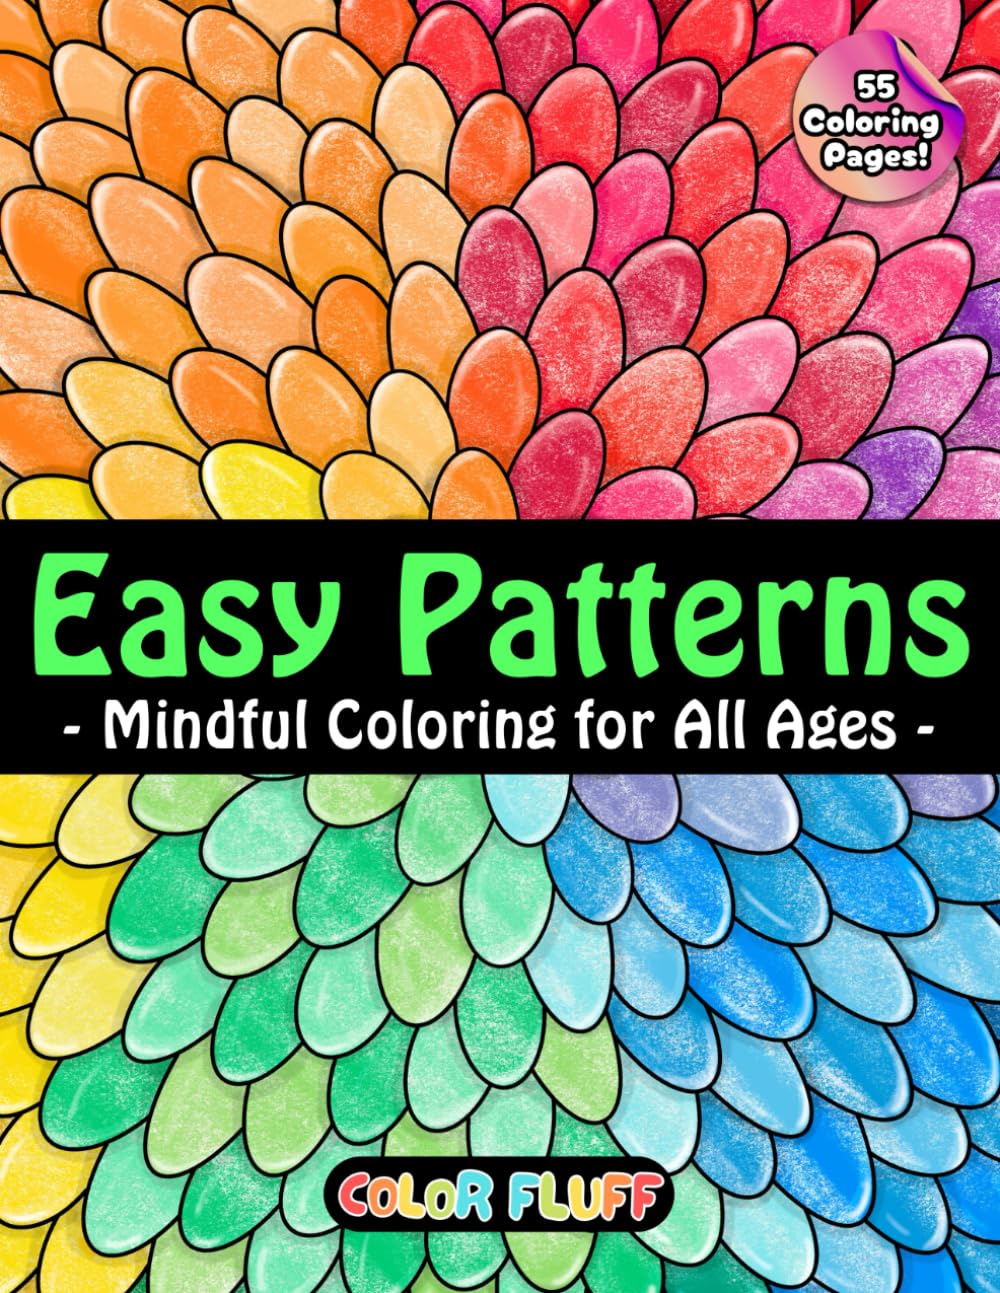 Easy Patterns Coloring Book: Calming and Unique Coloring Book for Adults and Kids of All Ages for Relaxation, Mindfulness, and Creativity